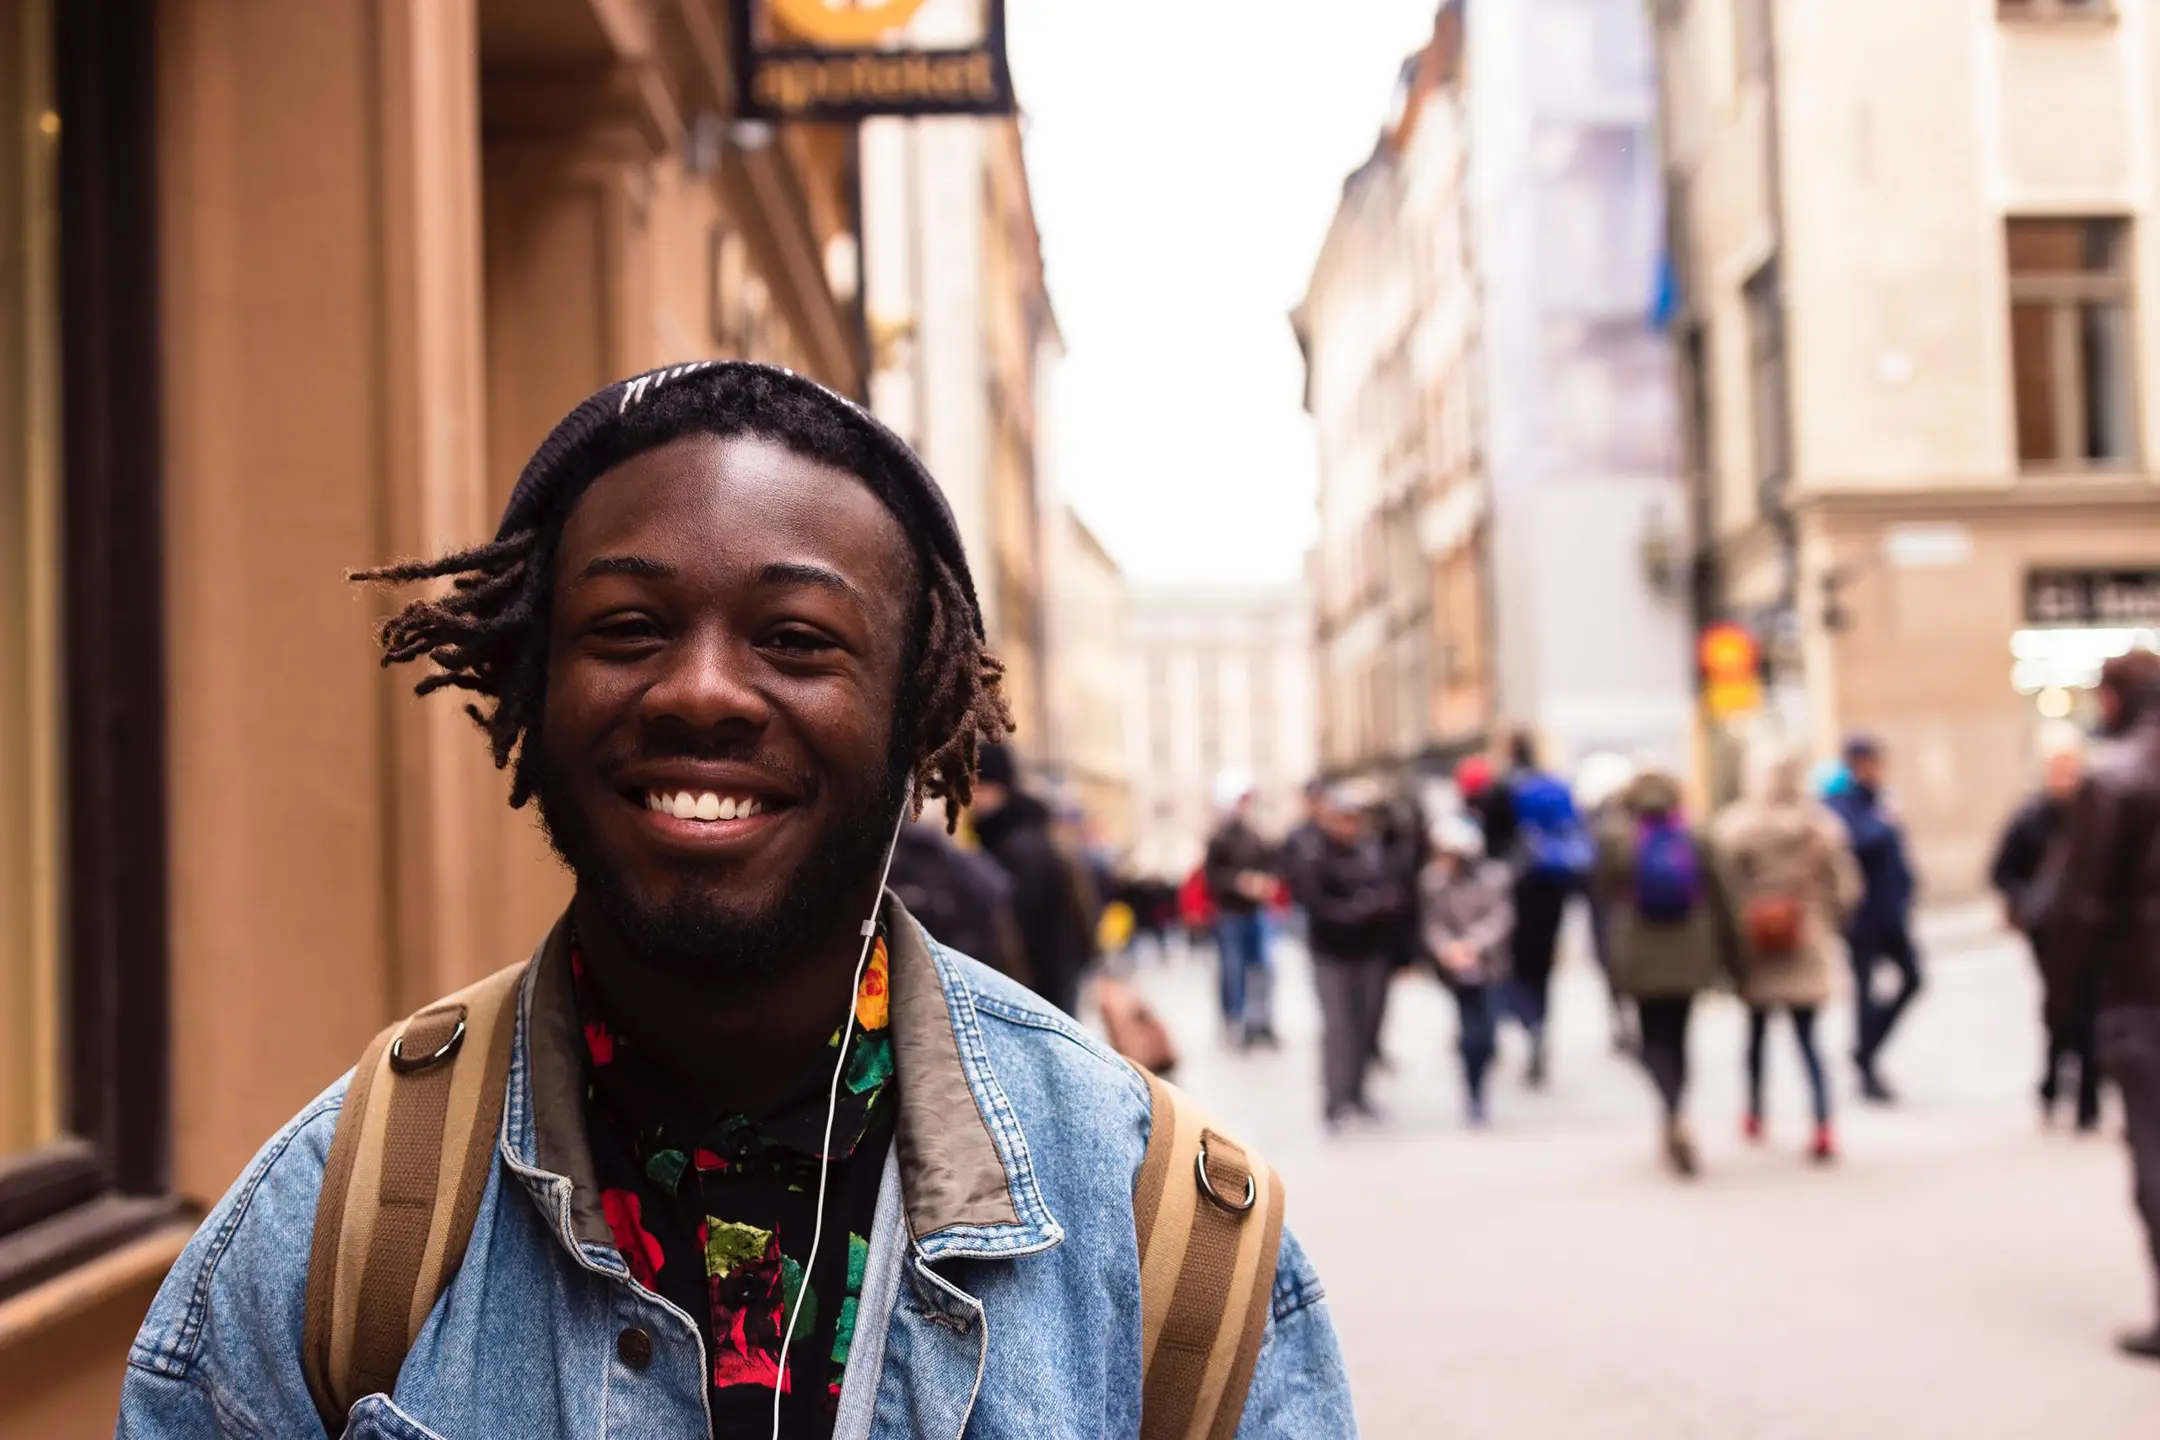 A joyful young man with dreadlocks wearing a beanie and denim jacket is smiling at the camera. He has earphones in and is carrying a messenger bag, suggesting he's enjoying music while out and about. The background is a busy city street scene with soft focus, highlighting the subject's happy demeanor in an urban setting